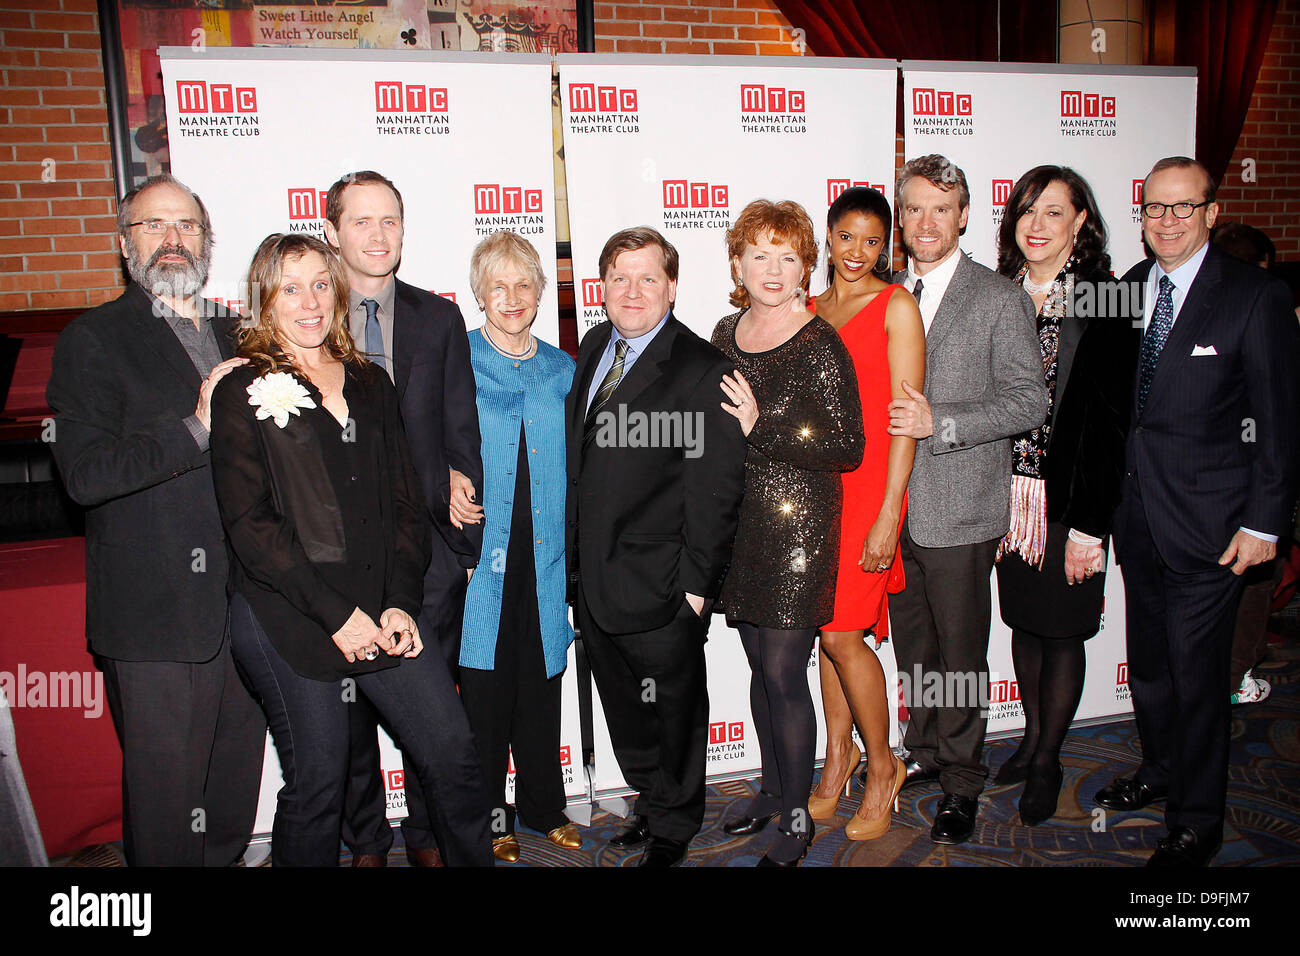 Daniel Sullivan, Frances McDormand, Patrick Carroll, Estelle Parsons, David Lindsay-Abaire, Becky Ann Baker, Renee Elise Goldsberry, Tate Donovan, Lynne Meadow and Barry Grove  Opening night after party for the Broadway production of 'Good People' held at B.B. King's show room. New York City, USA - 03.03.11 Stock Photo